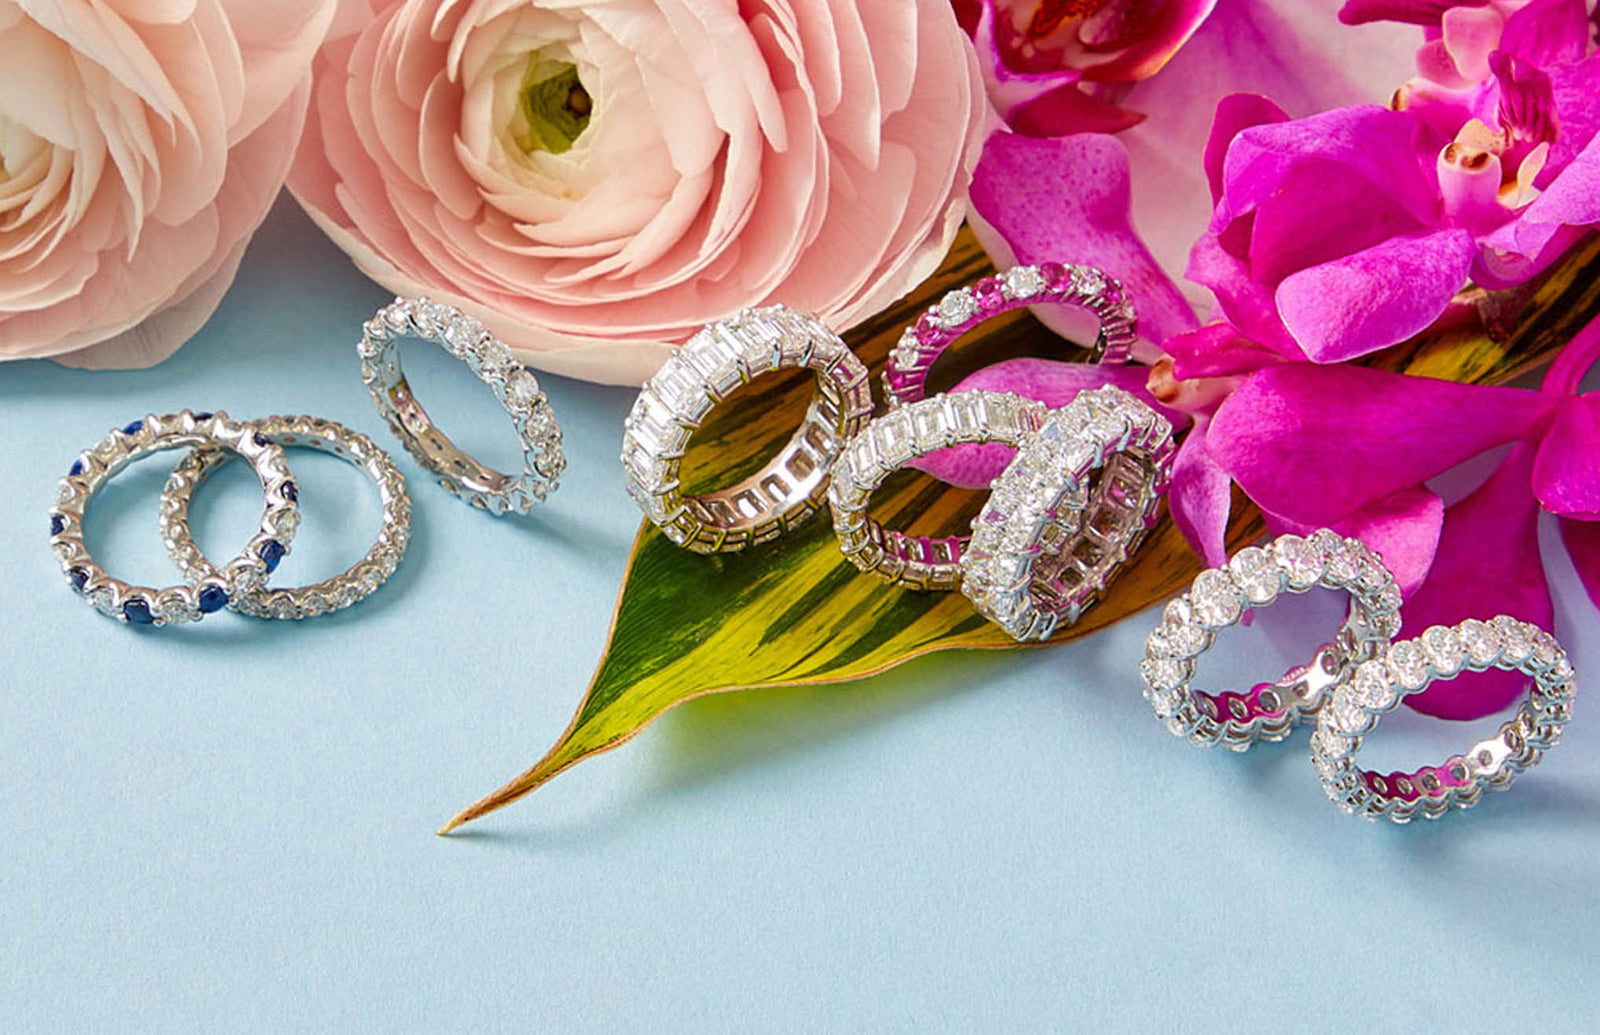 Spring Jewelry: Mother's Rings & Baby Shoe Charms